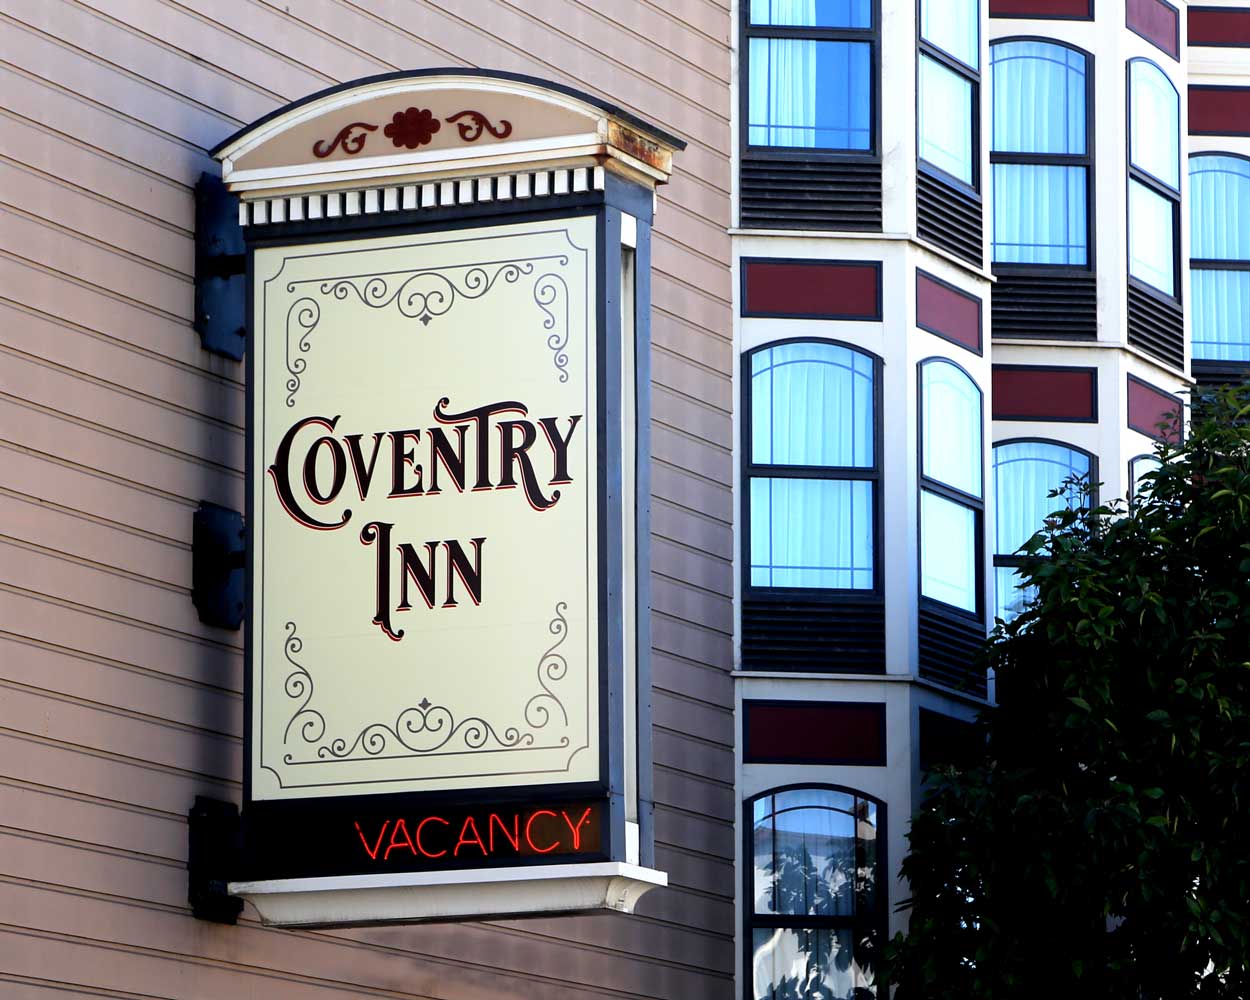 Sign of the Coventry Inn